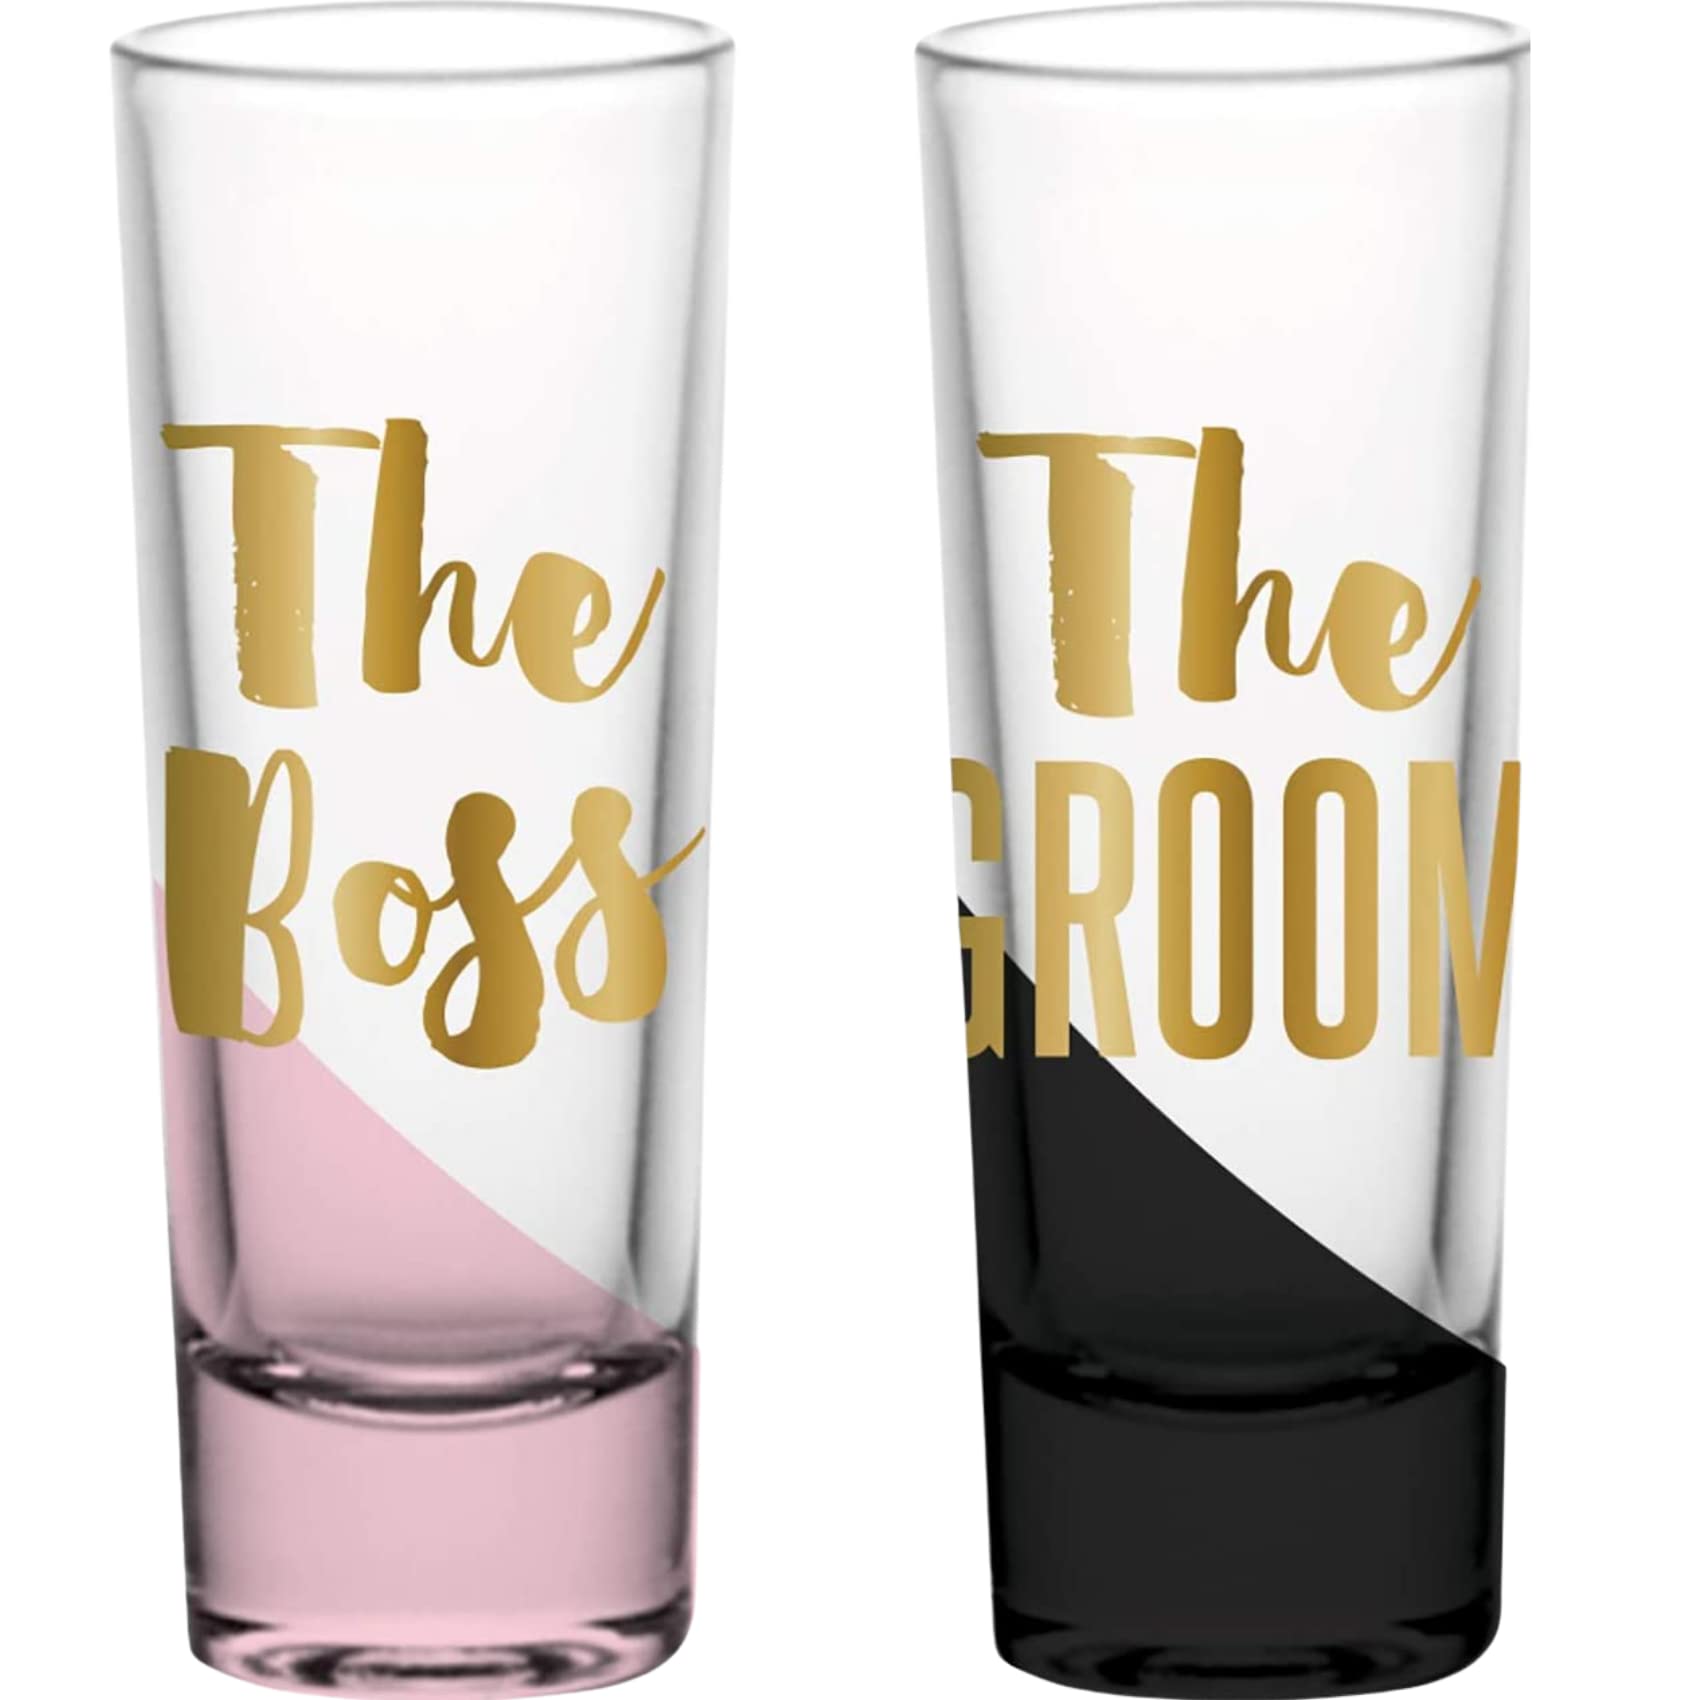 Engagement Shot Glass Sets for Couples and Gay Couples Toast, I Do Me Too and The Boss The Groom Shooters, Wedding and Engagement Gifts for Couples Newly Engaged, 2 Sets